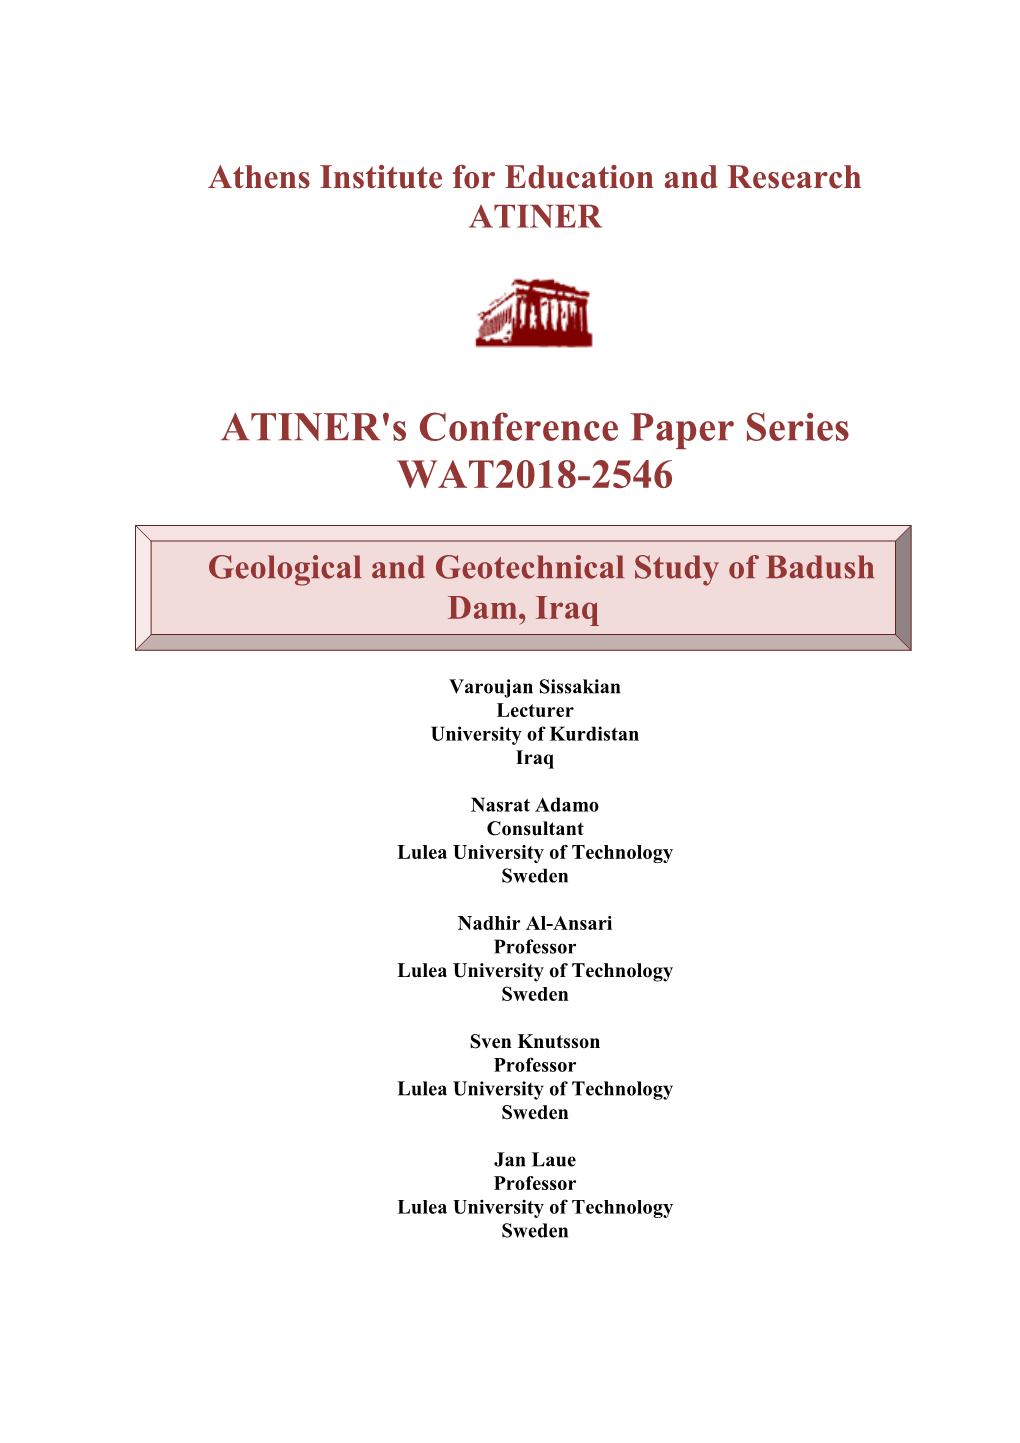 ATINER's Conference Paper Series WAT2018-2546